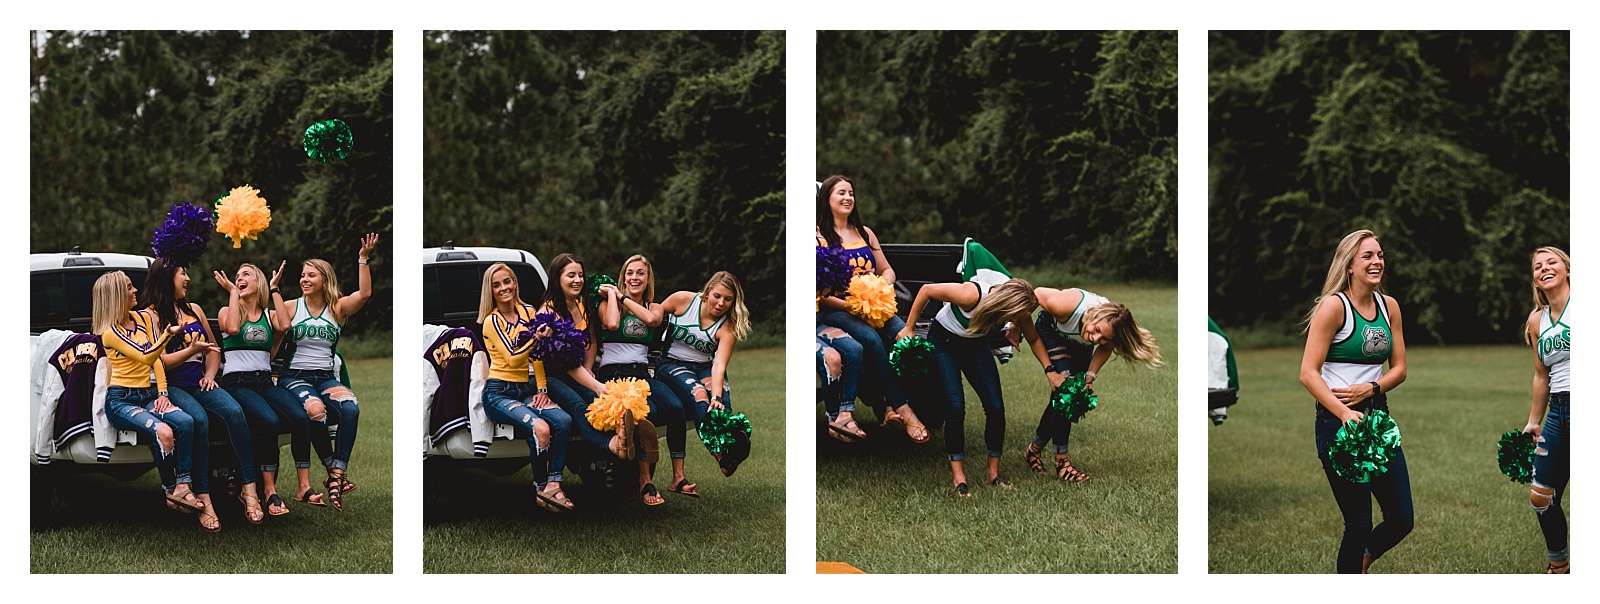 Football inspired themed session for high school seniors in Tallahassee, FL. Shelly Williams Photography